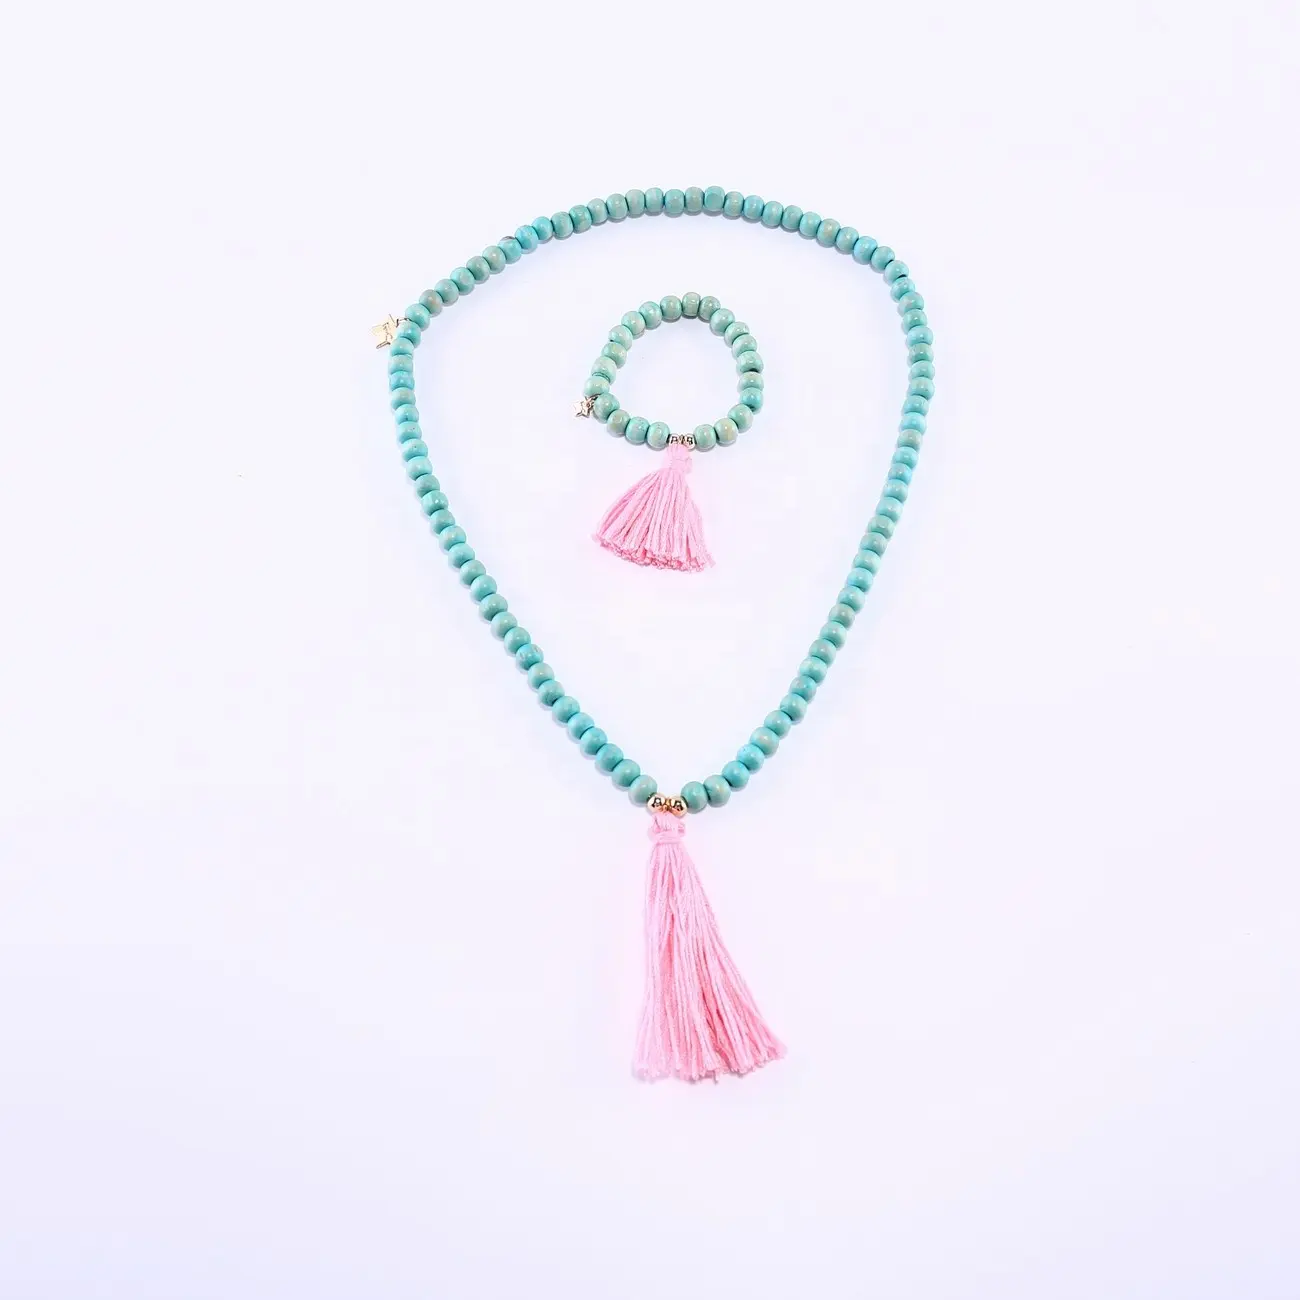 Wholesale Necklace Bracelet Set for Children Wood Beads with Tassel Necklace Accessories